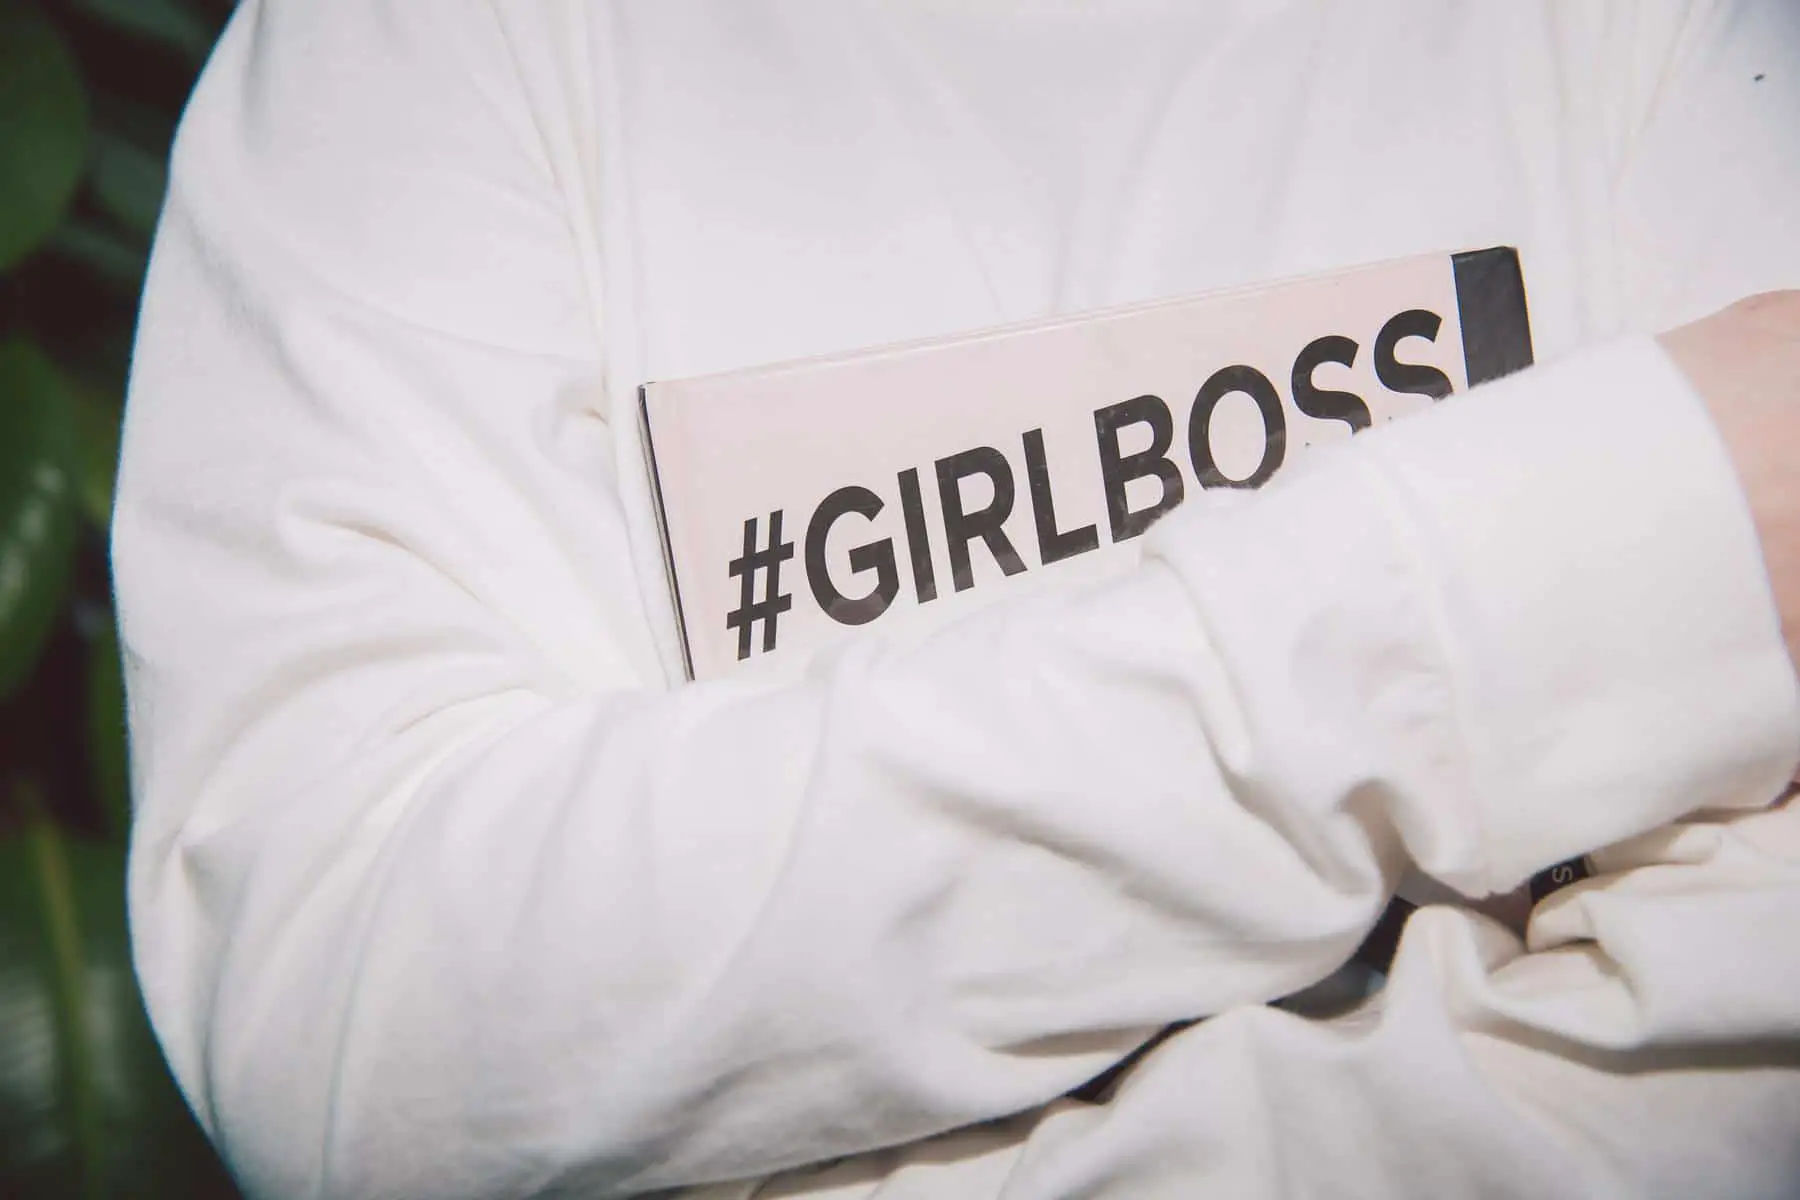 Person holding notebook with girlboss hashtag